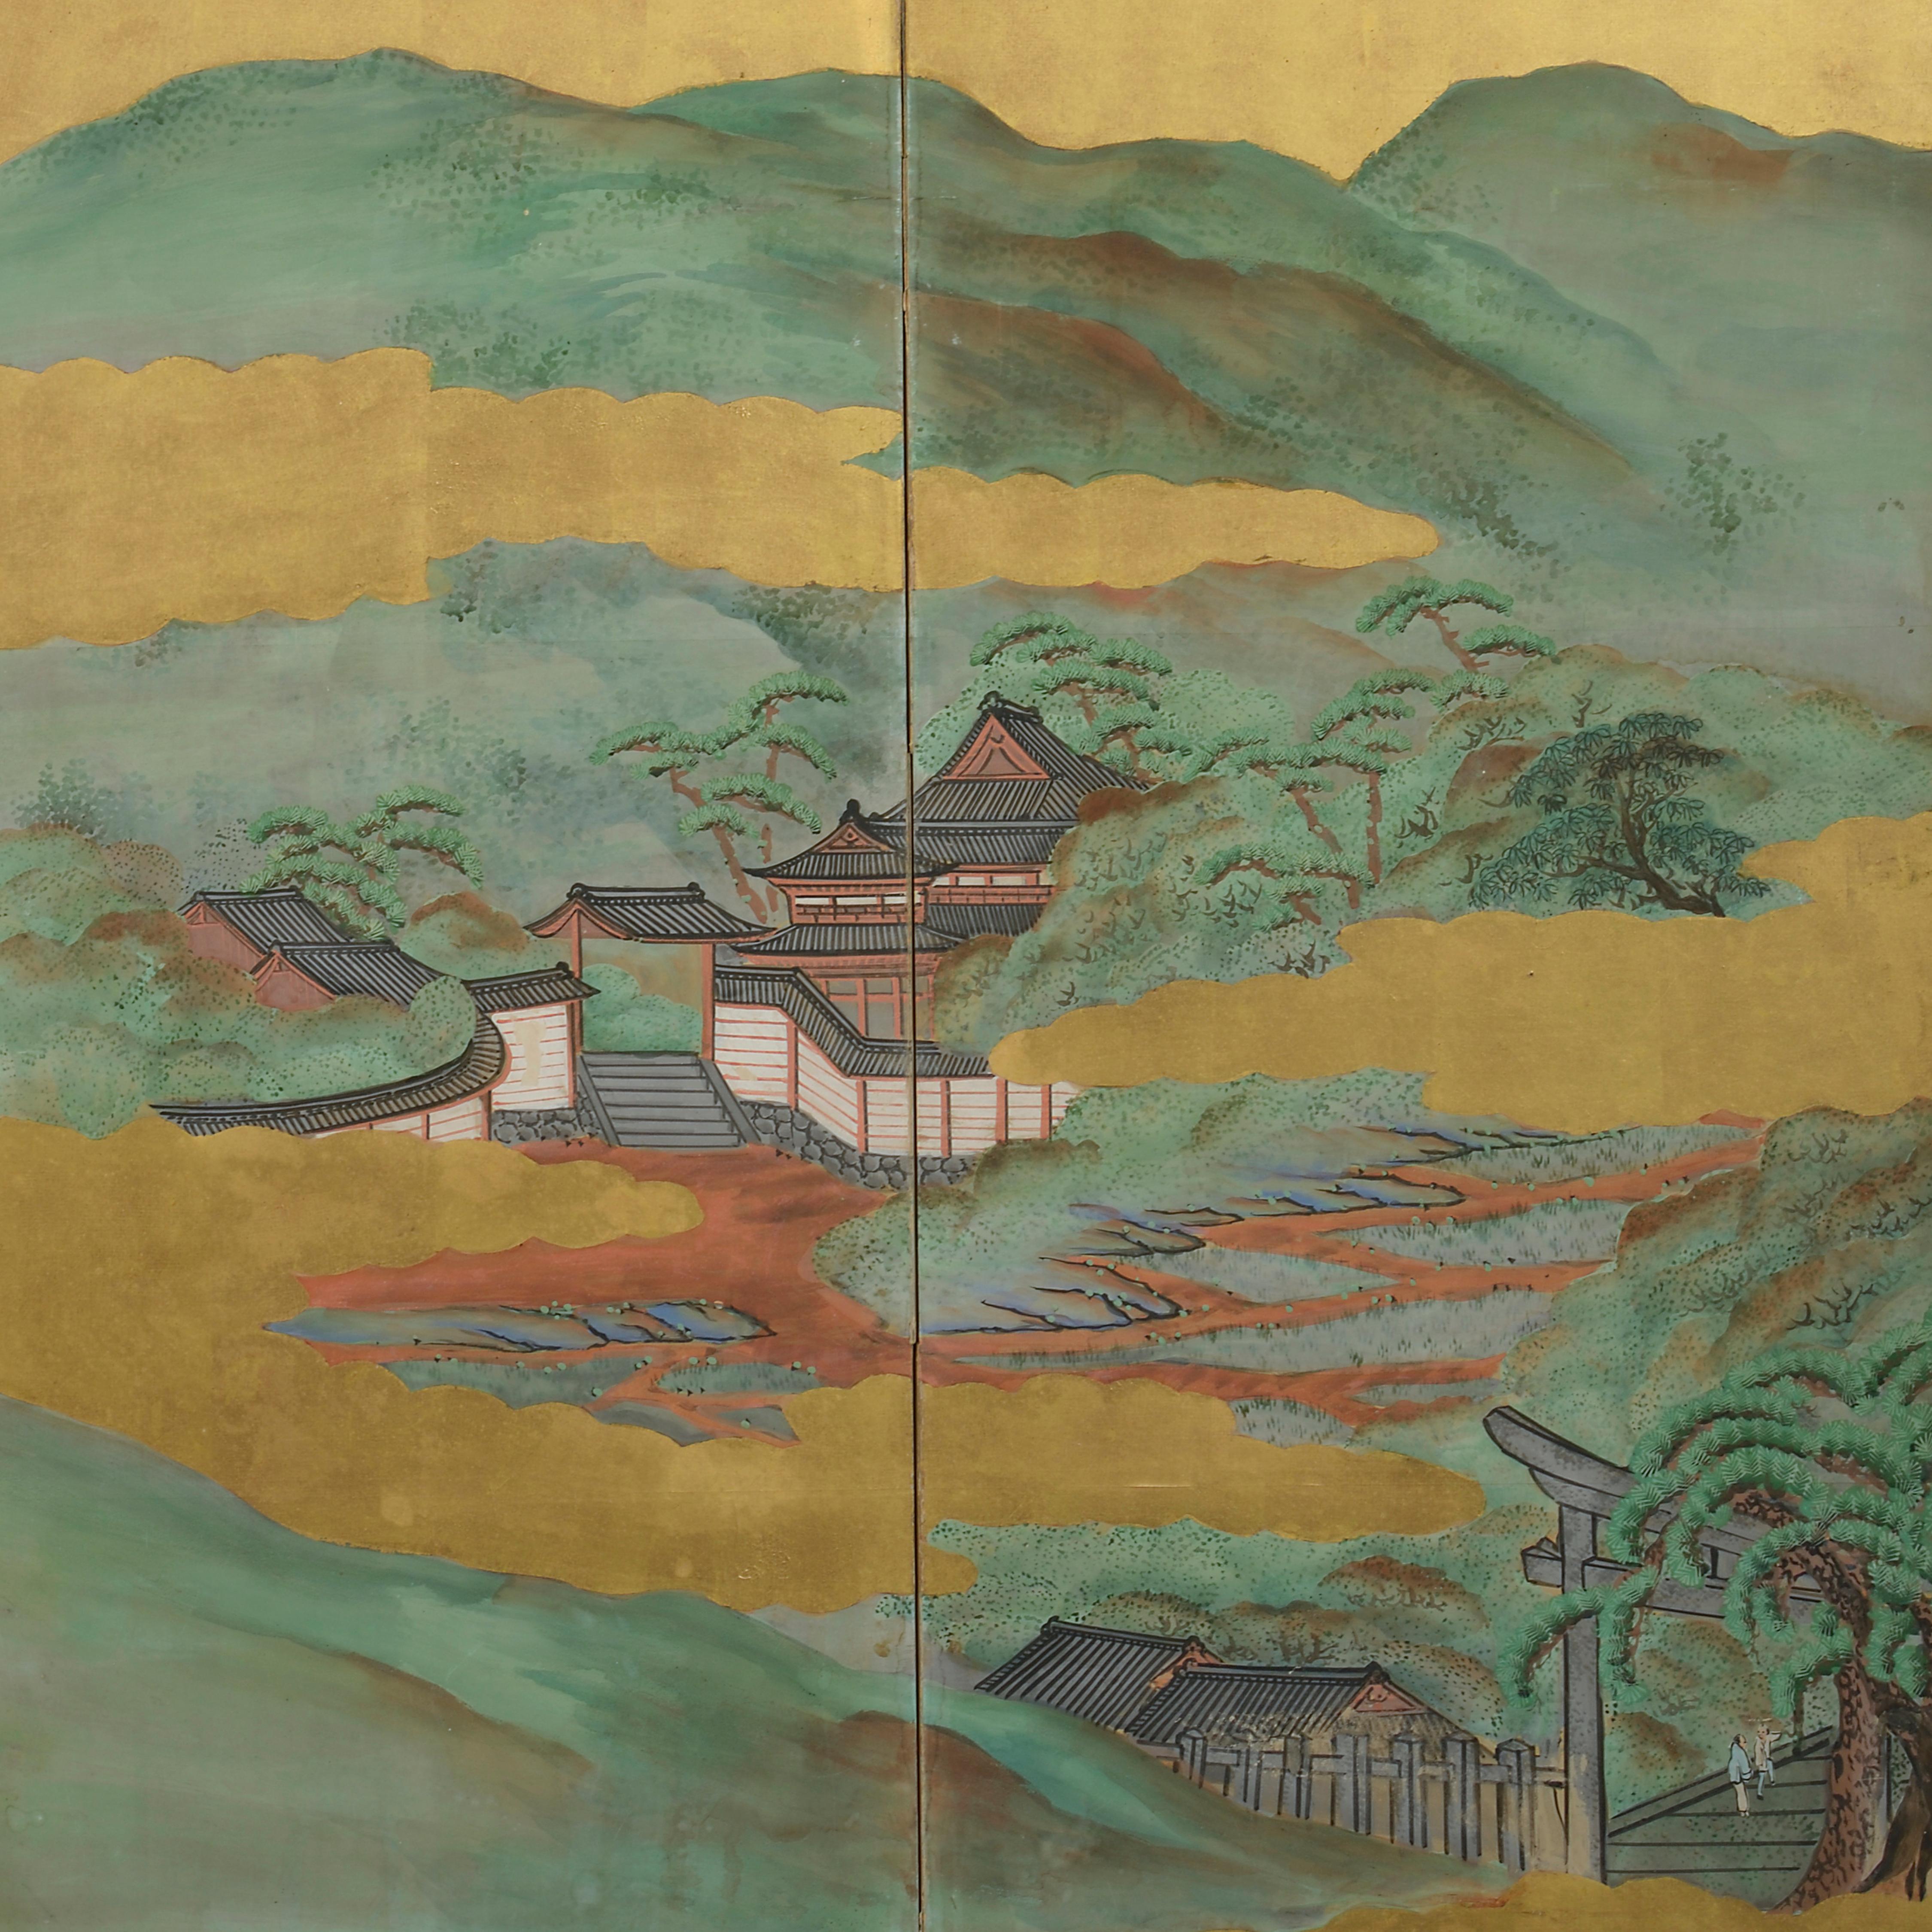 An early 20th century six fold paper screen, depicting an imaginary mountainous landscape with temples and pagodas depicted in the foreground.